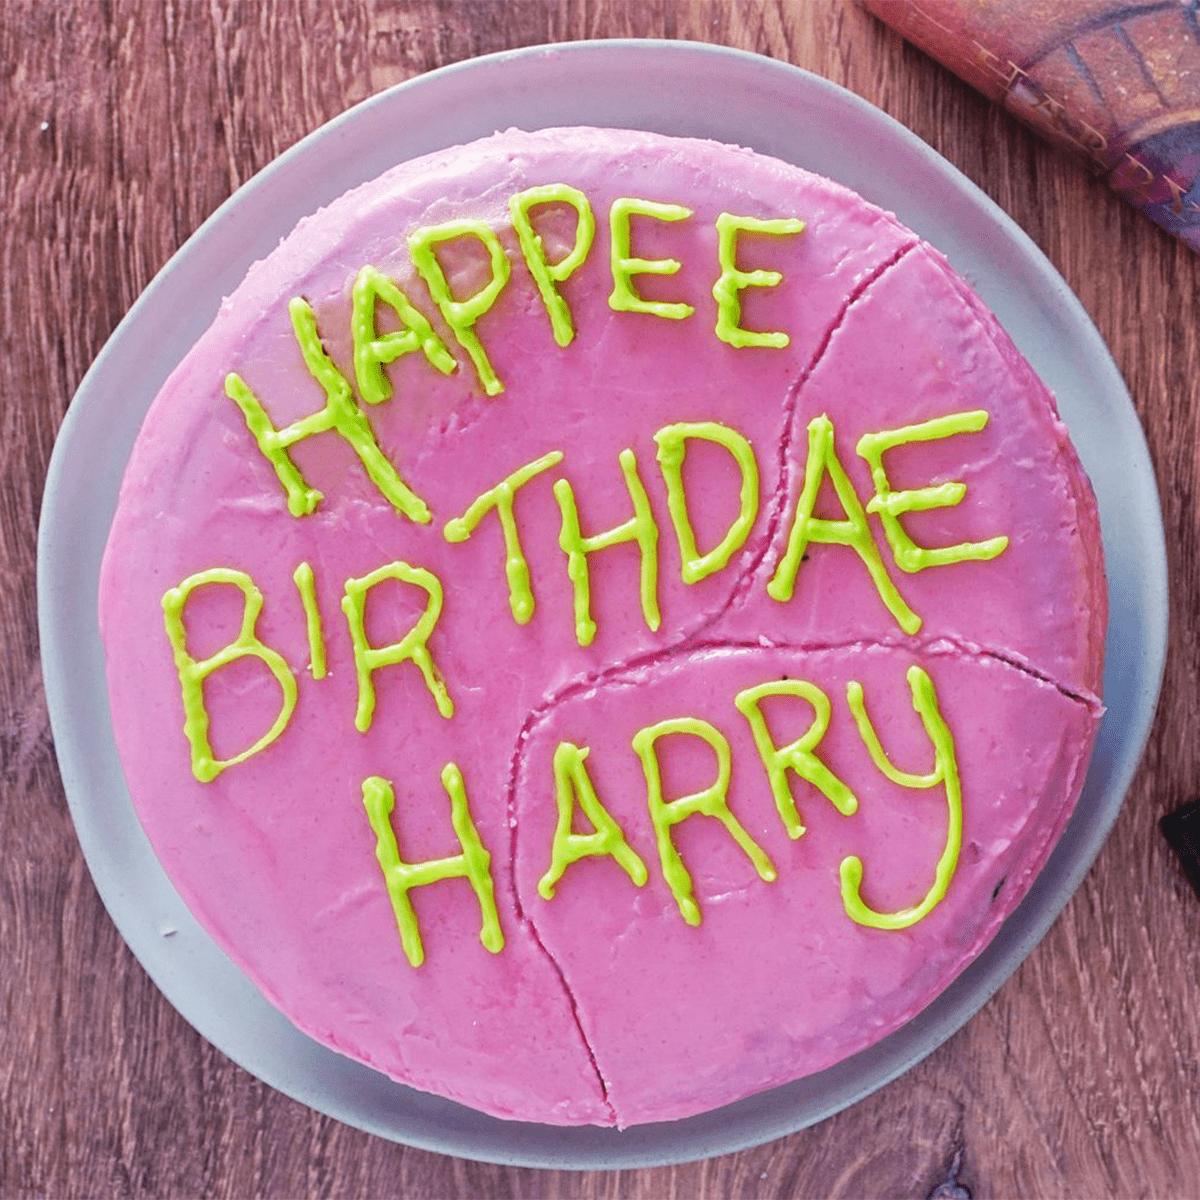 How to Throw a Quick and Easy Harry Potter Birthday Party - One